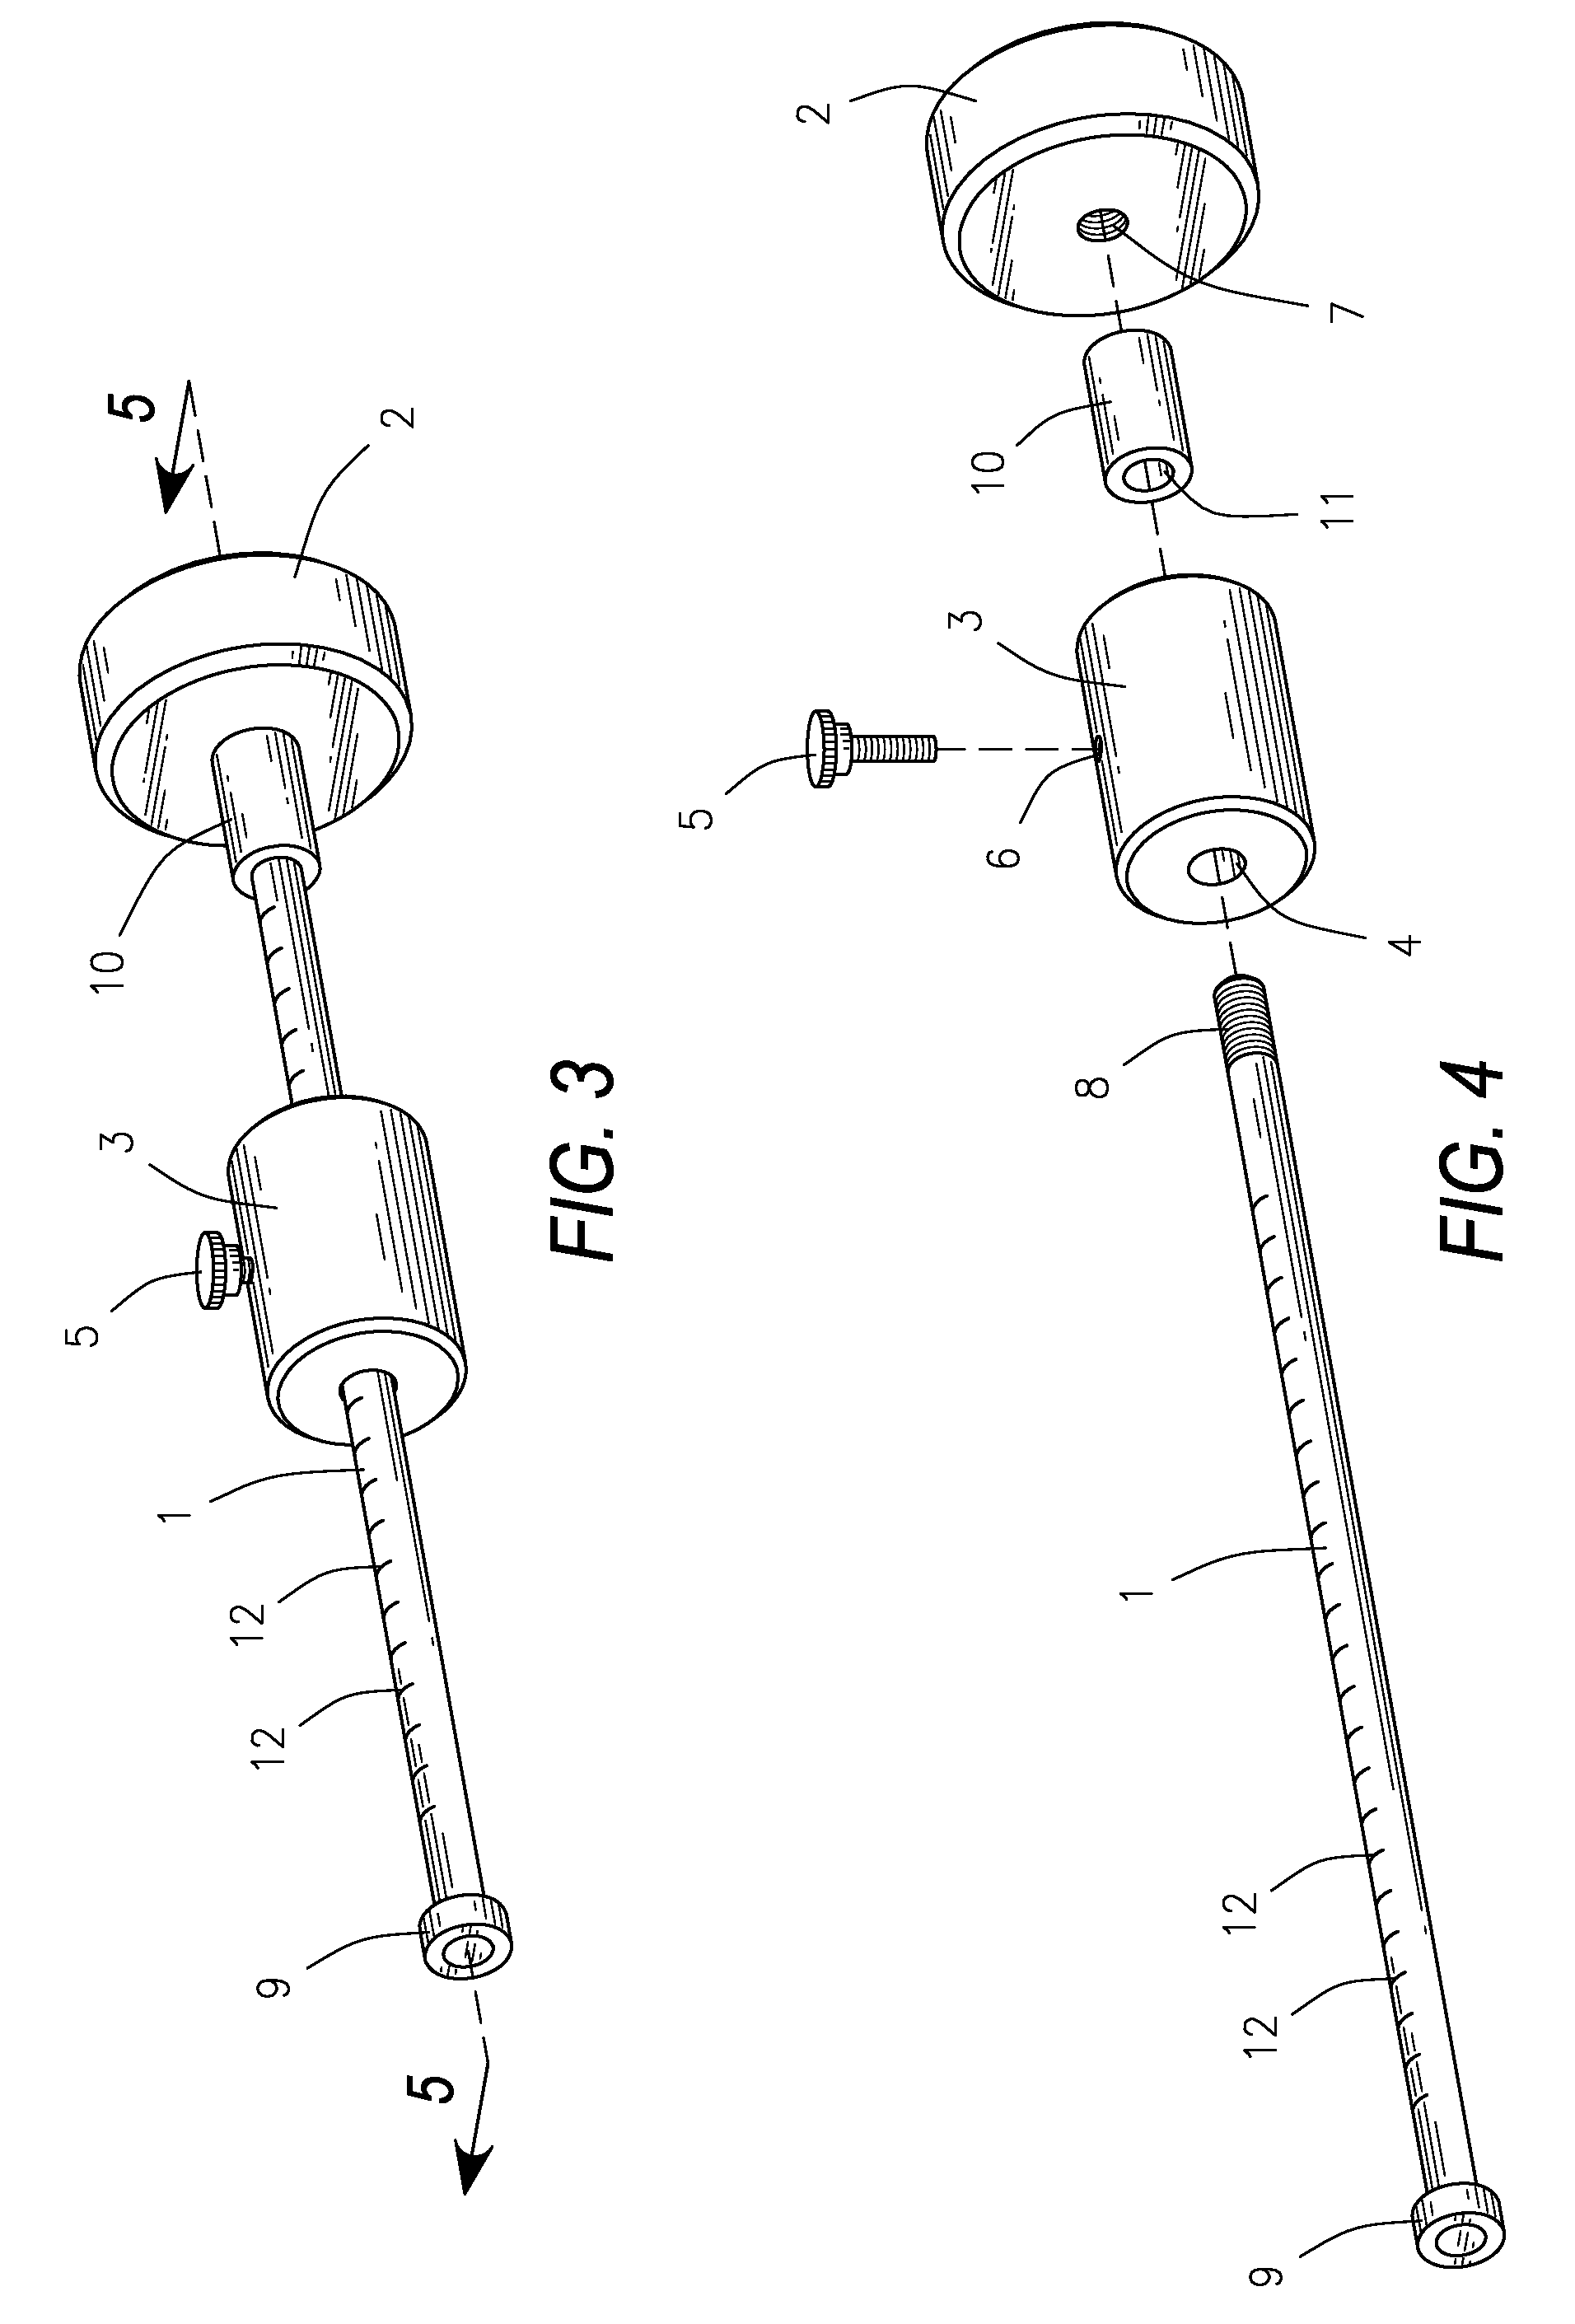 Adjustable weight training/therapy device